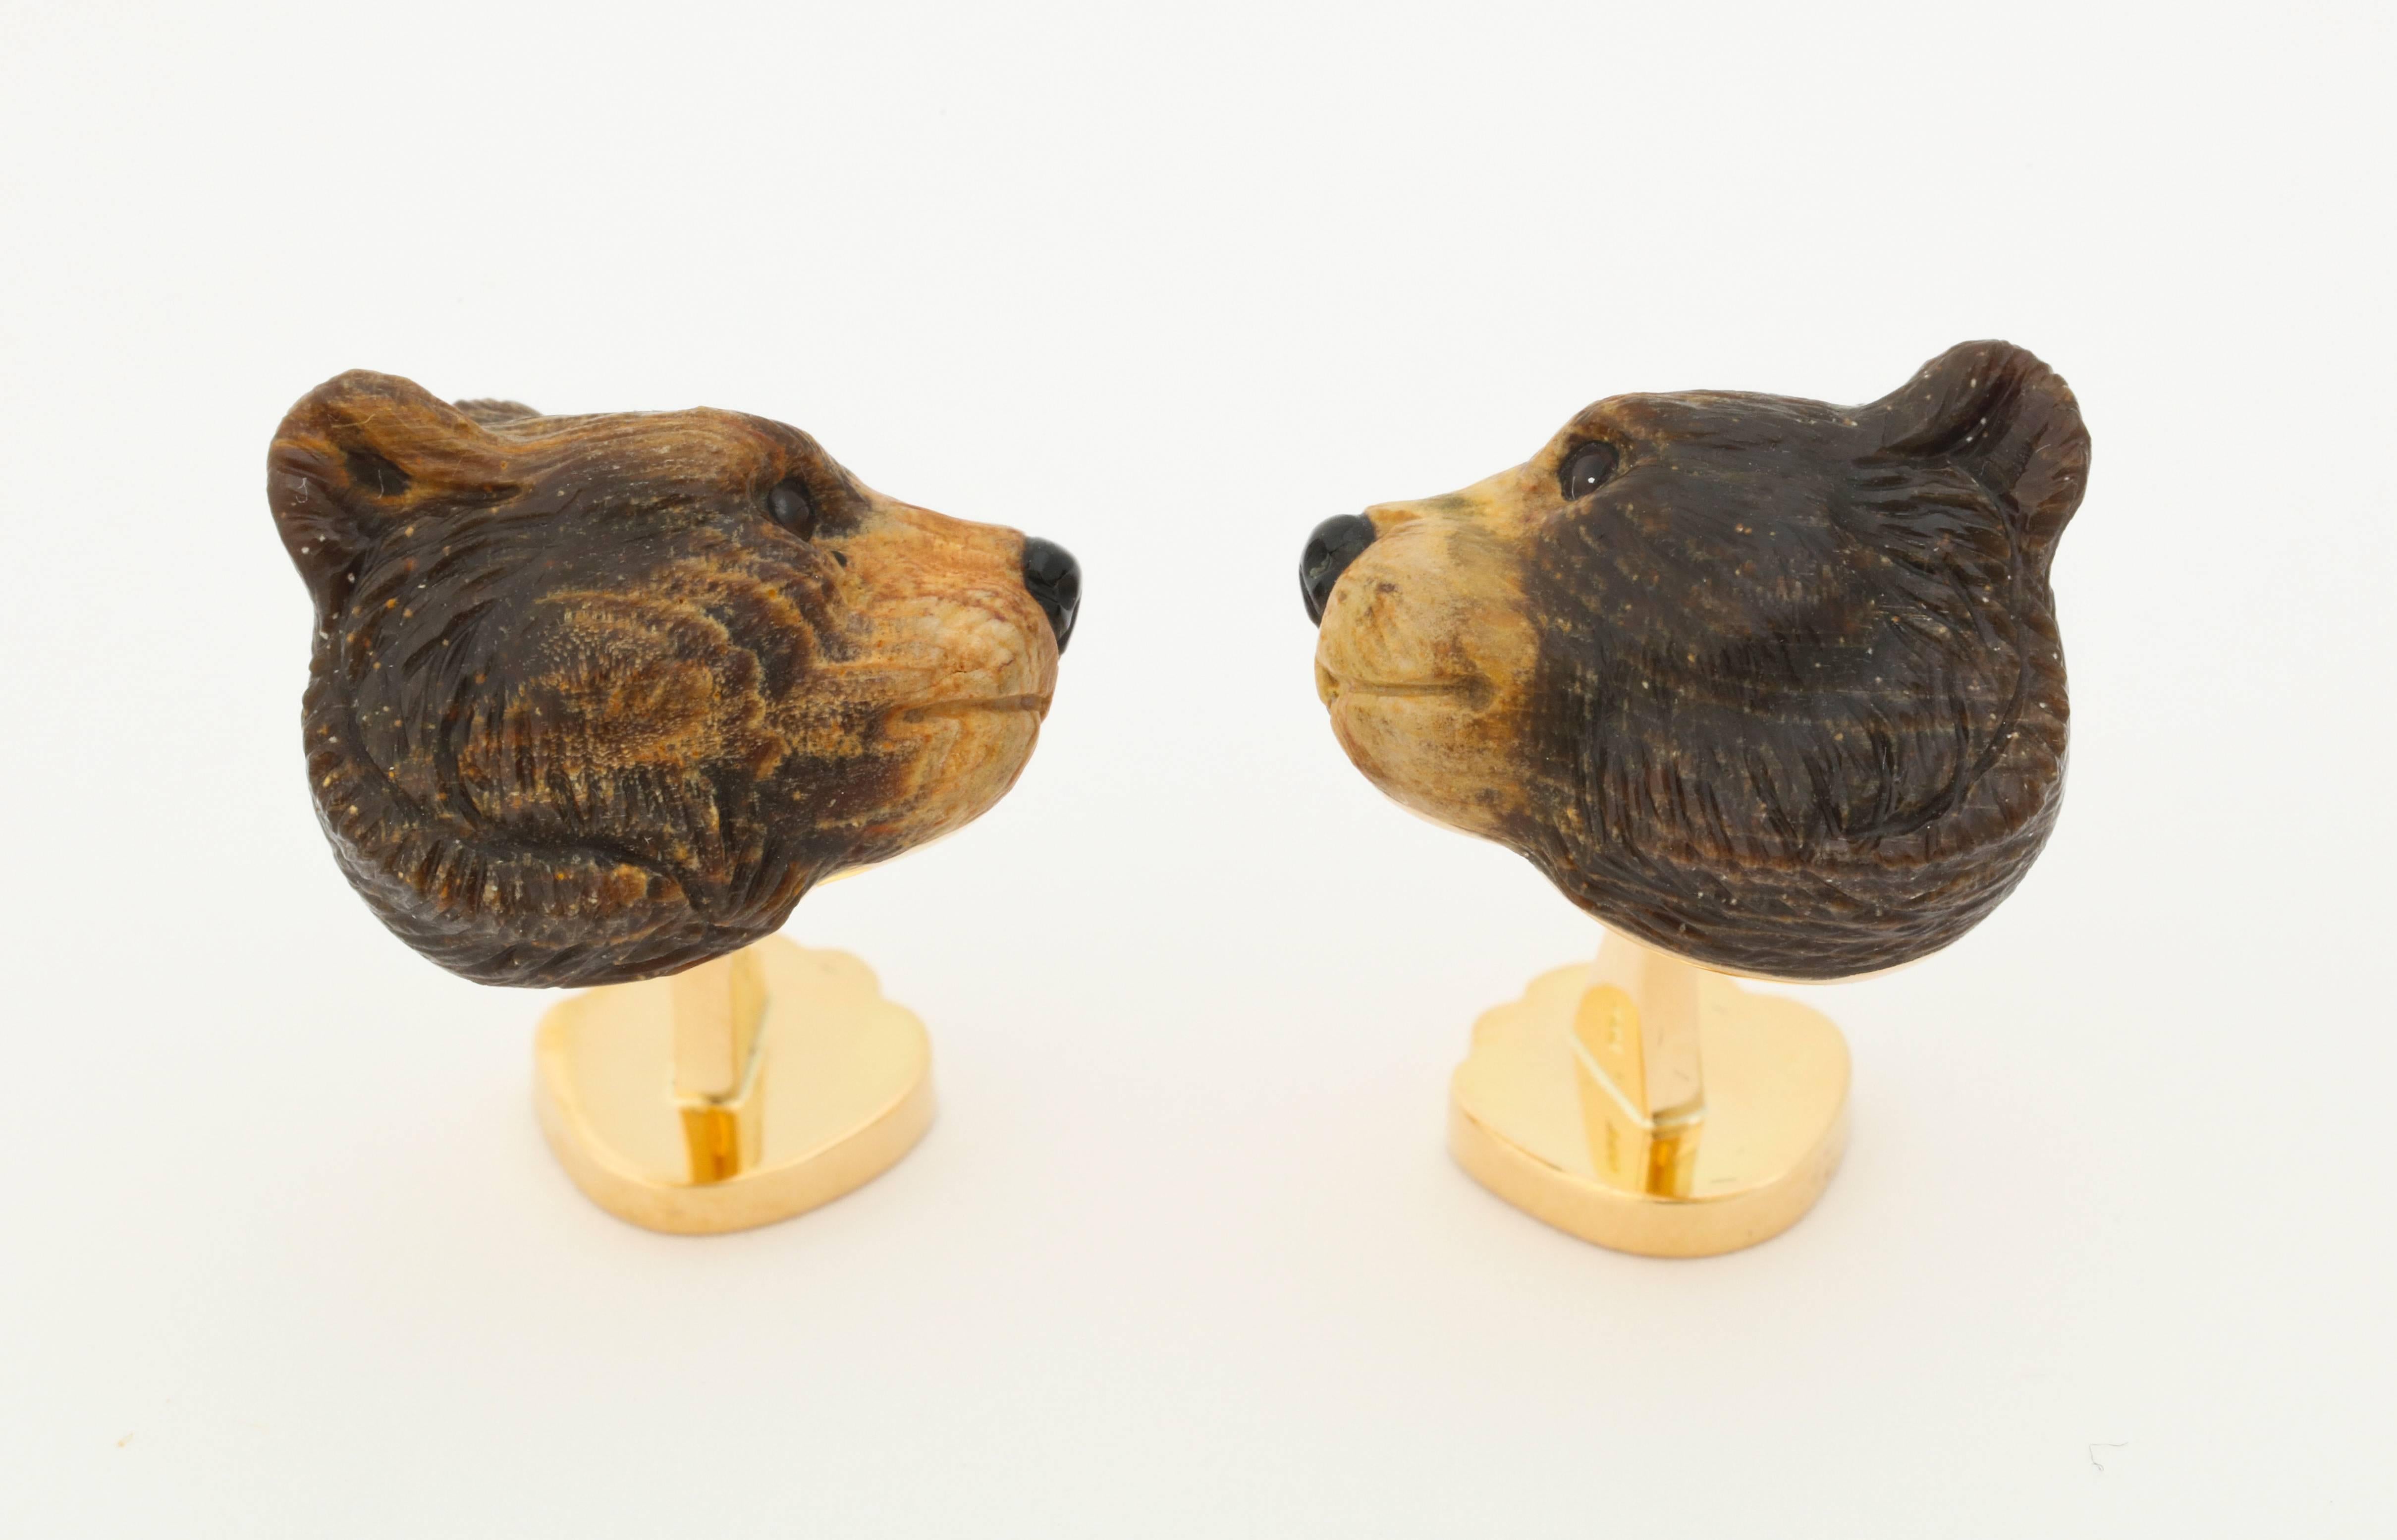 Finely carved in Germany, from fossilized wood, these bears show a level of detail rarely found today.  The single piece of wood chosen for this work was carefully positioned so that the light colored vein would be on the front of the face.  The